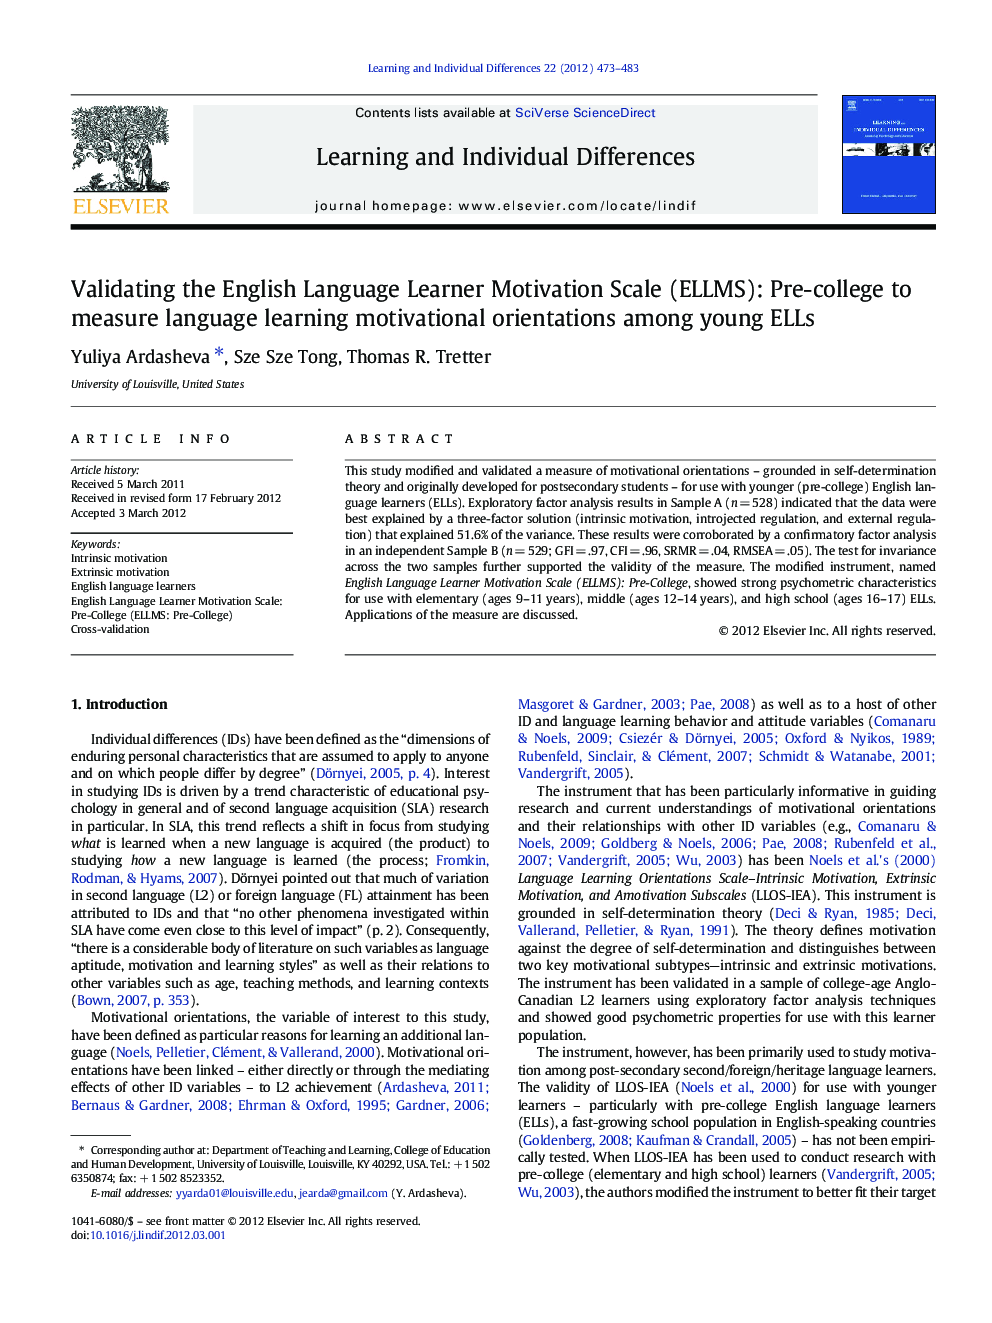 Validating the English Language Learner Motivation Scale (ELLMS): Pre-college to measure language learning motivational orientations among young ELLs